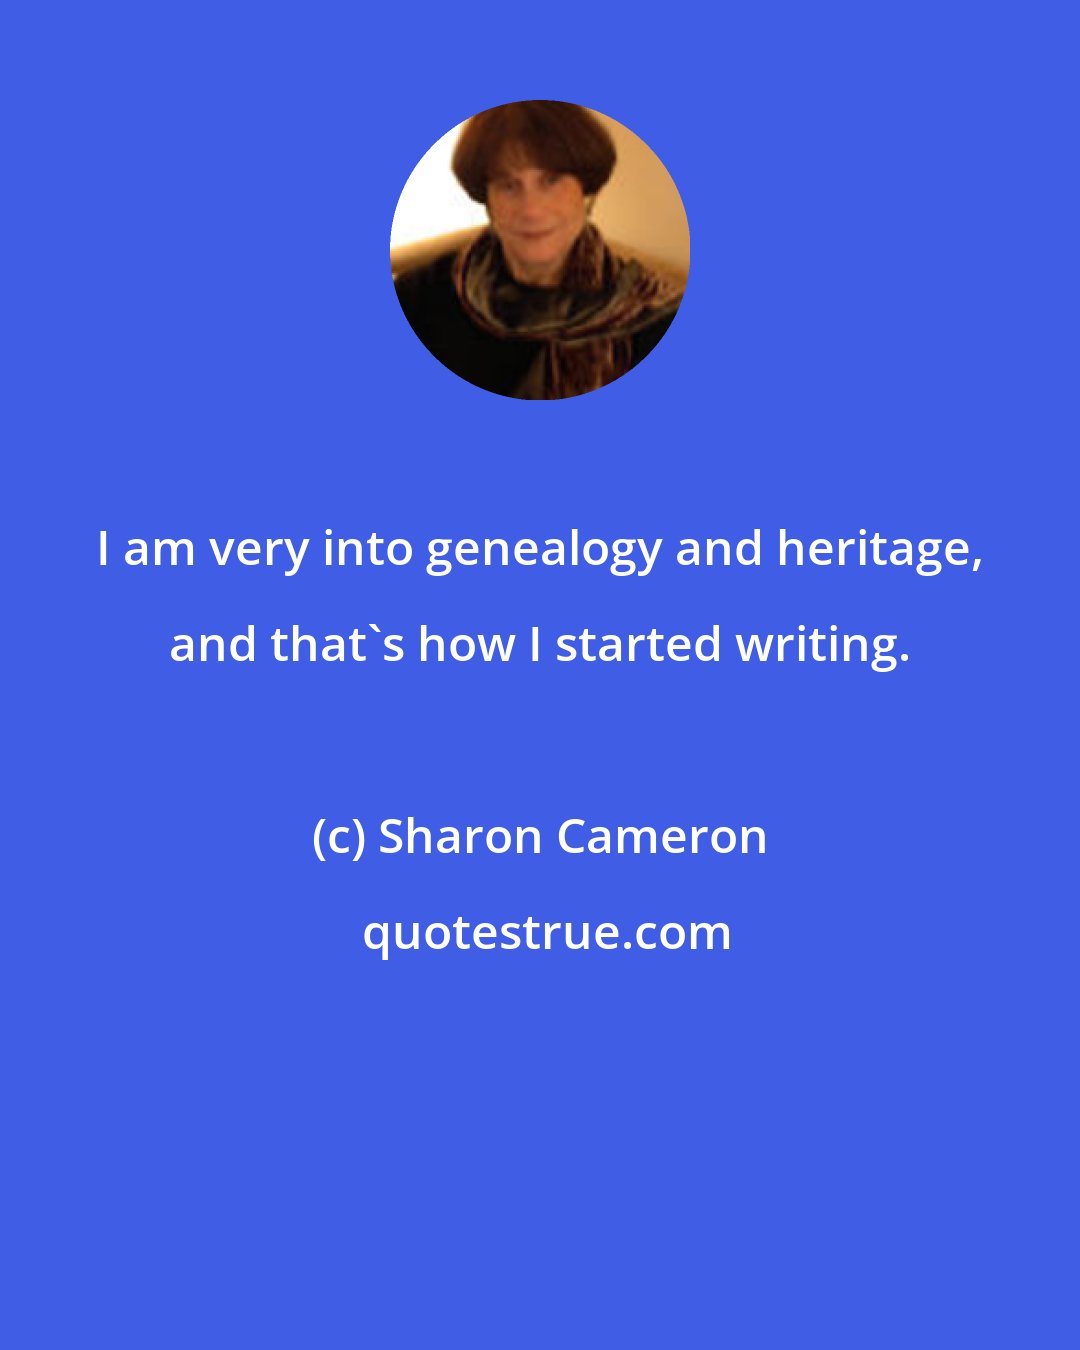 Sharon Cameron: I am very into genealogy and heritage, and that's how I started writing.